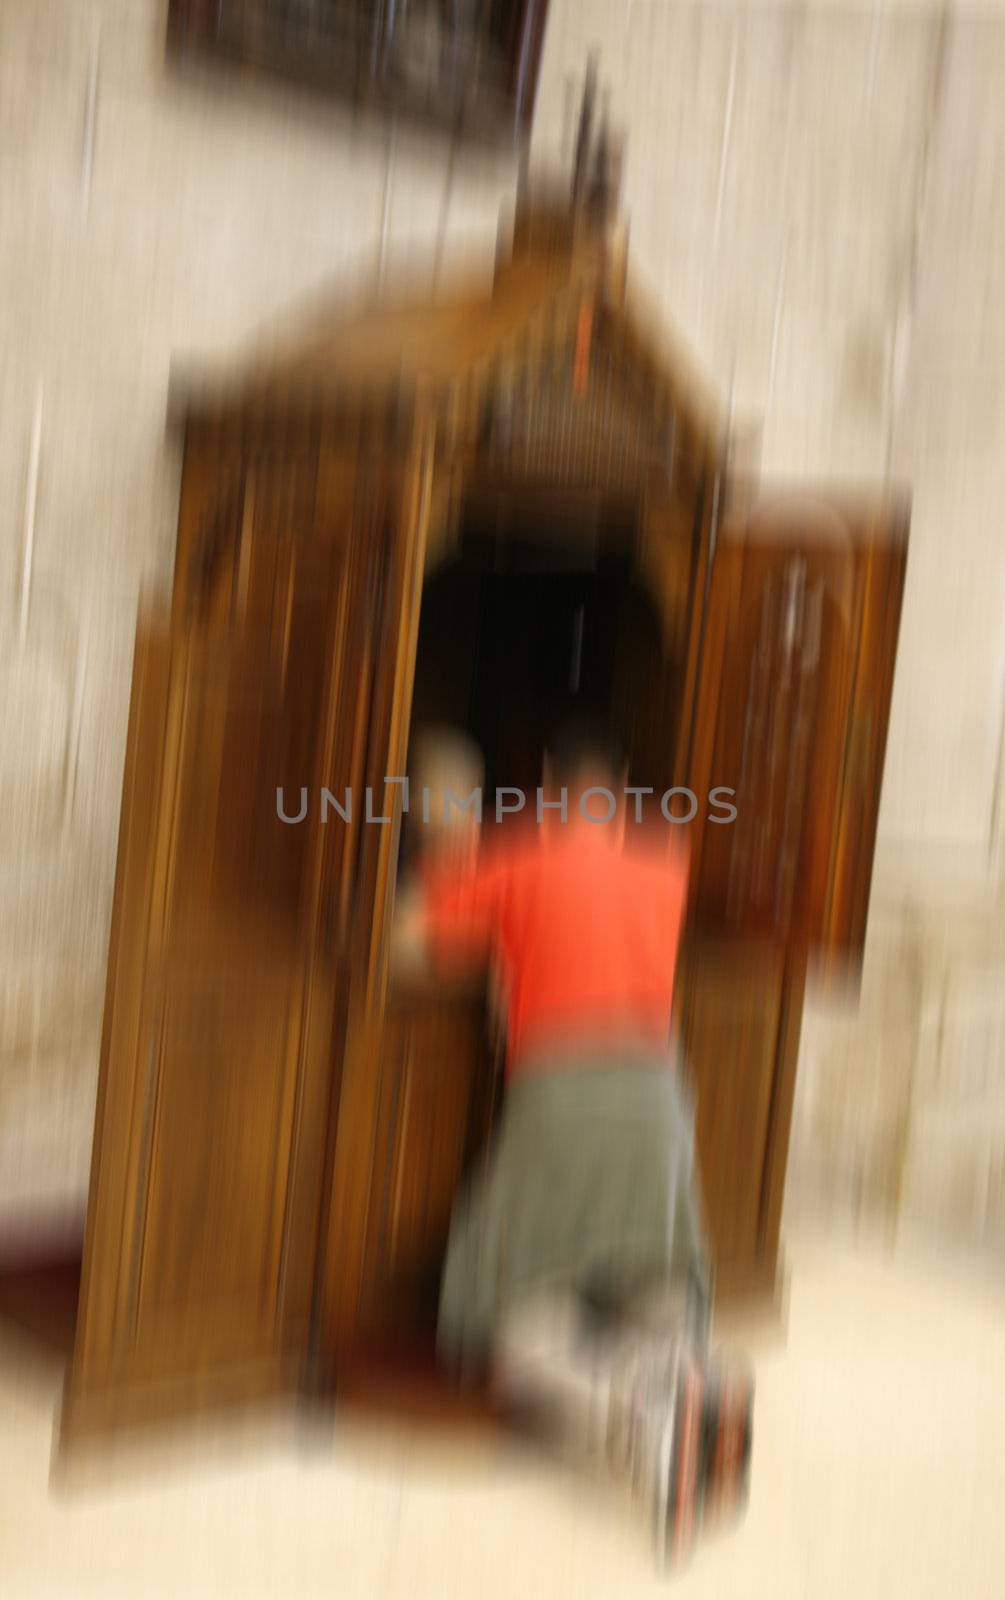 Pilgrim kneeling for confession in the Cathedral of Santiago de Compostela. Intentional motion blur to keep the privacy of the involved.